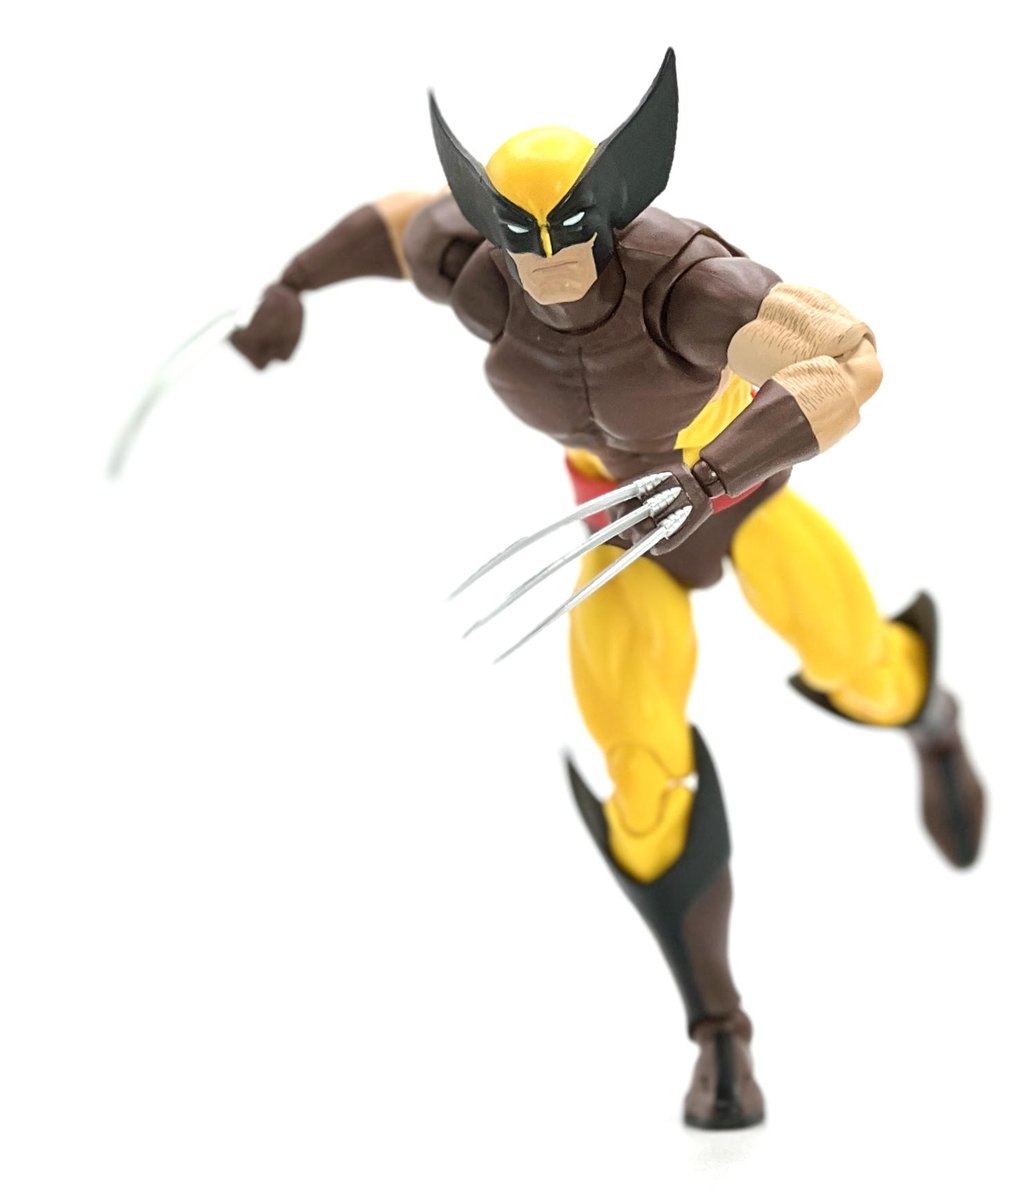 It's Wolverine Wednesday, bubs and bubettes! So, comment below with pics of Jimmy, Patch, Logan, Wolverine...whatever it is you call the ol' canucklehead.

I went with my fave Wolvie and a simple running pose for tonight's shot.

Have fun, and happy snapping!